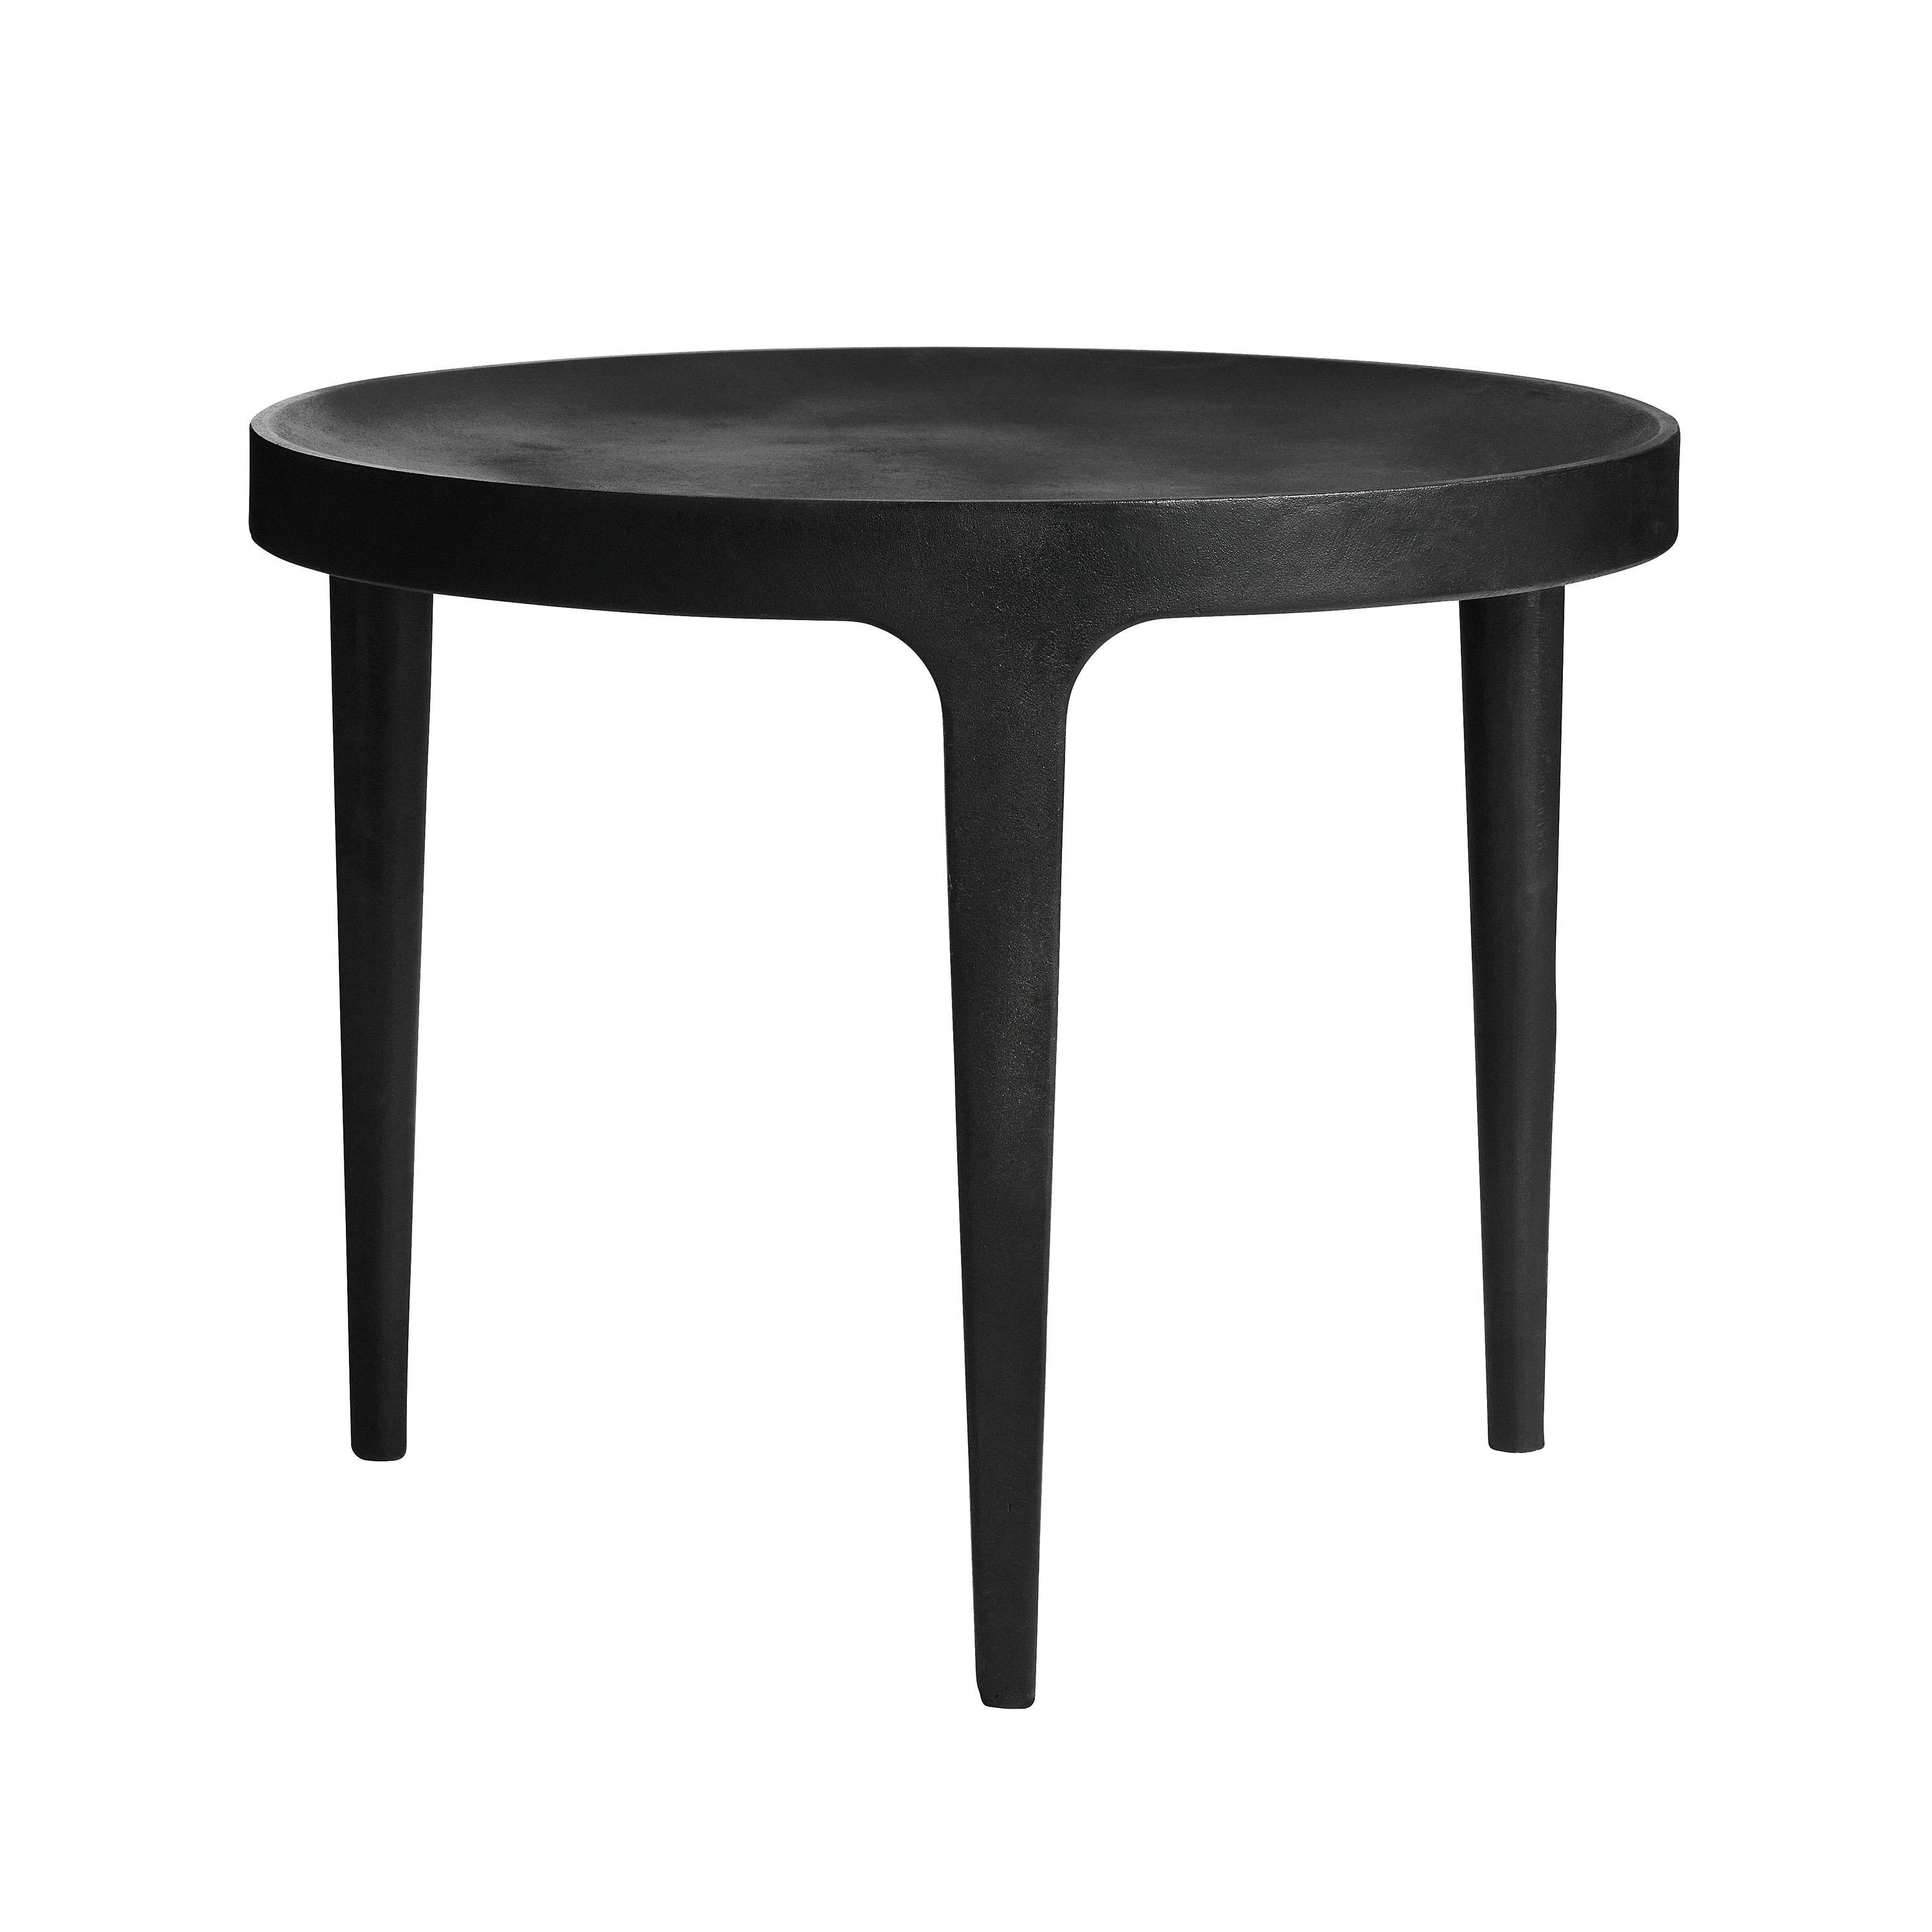 Organic Modern Contemporary Coffee Table 'Ghost' by Fogia, Black Aluminium For Sale